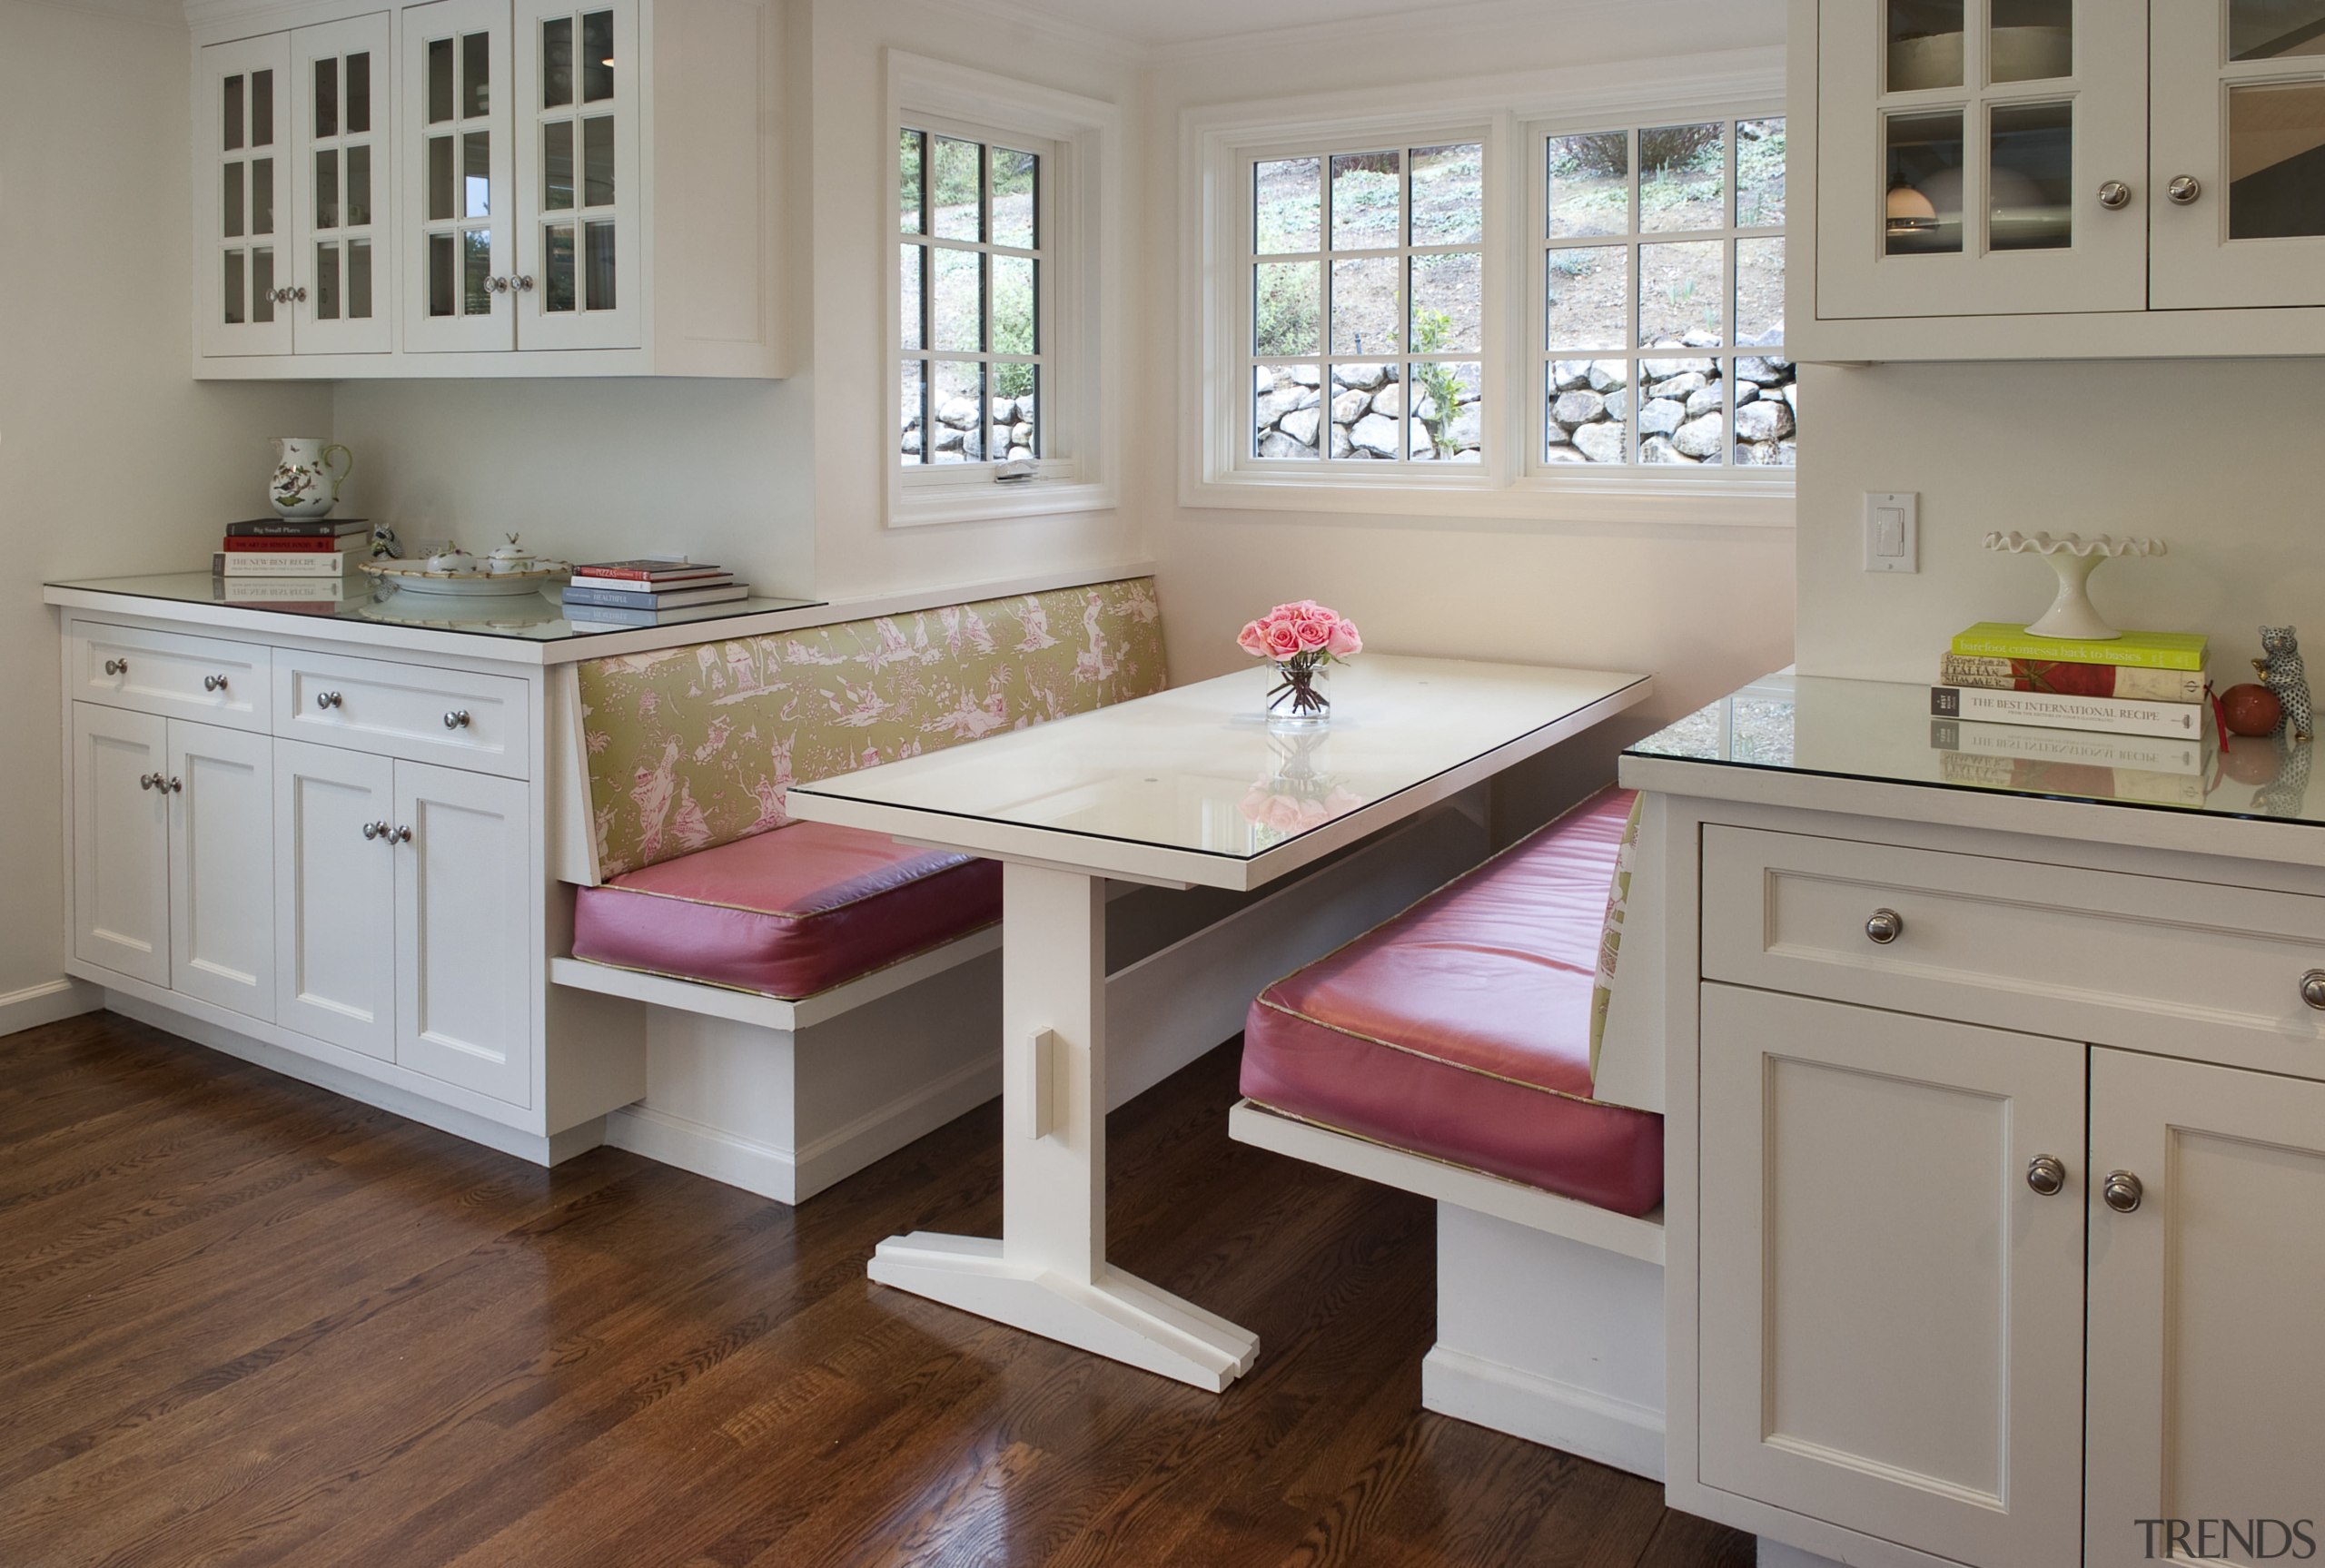 window seat with pink cushions, two seats face cabinetry, countertop, cuisine classique, floor, flooring, furniture, hardwood, home, interior design, kitchen, room, table, window, wood, wood flooring, gray, brown